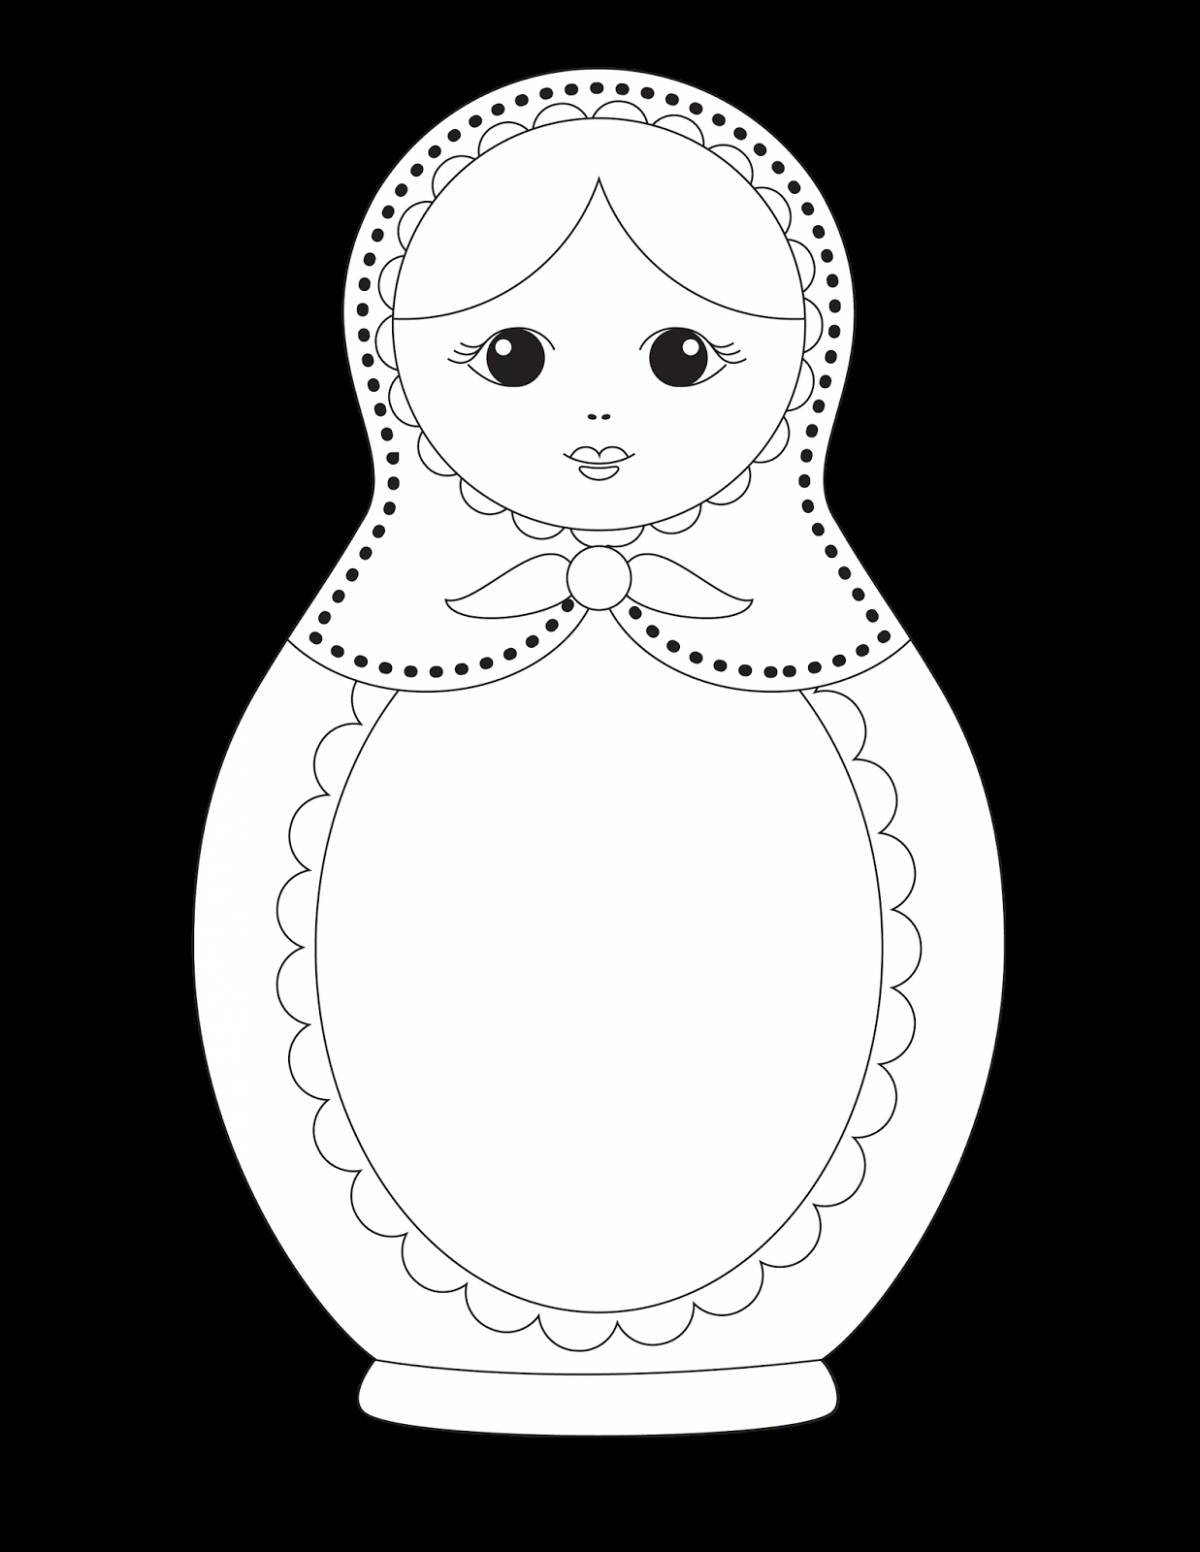 Coloring book with a bright pattern of matryoshka